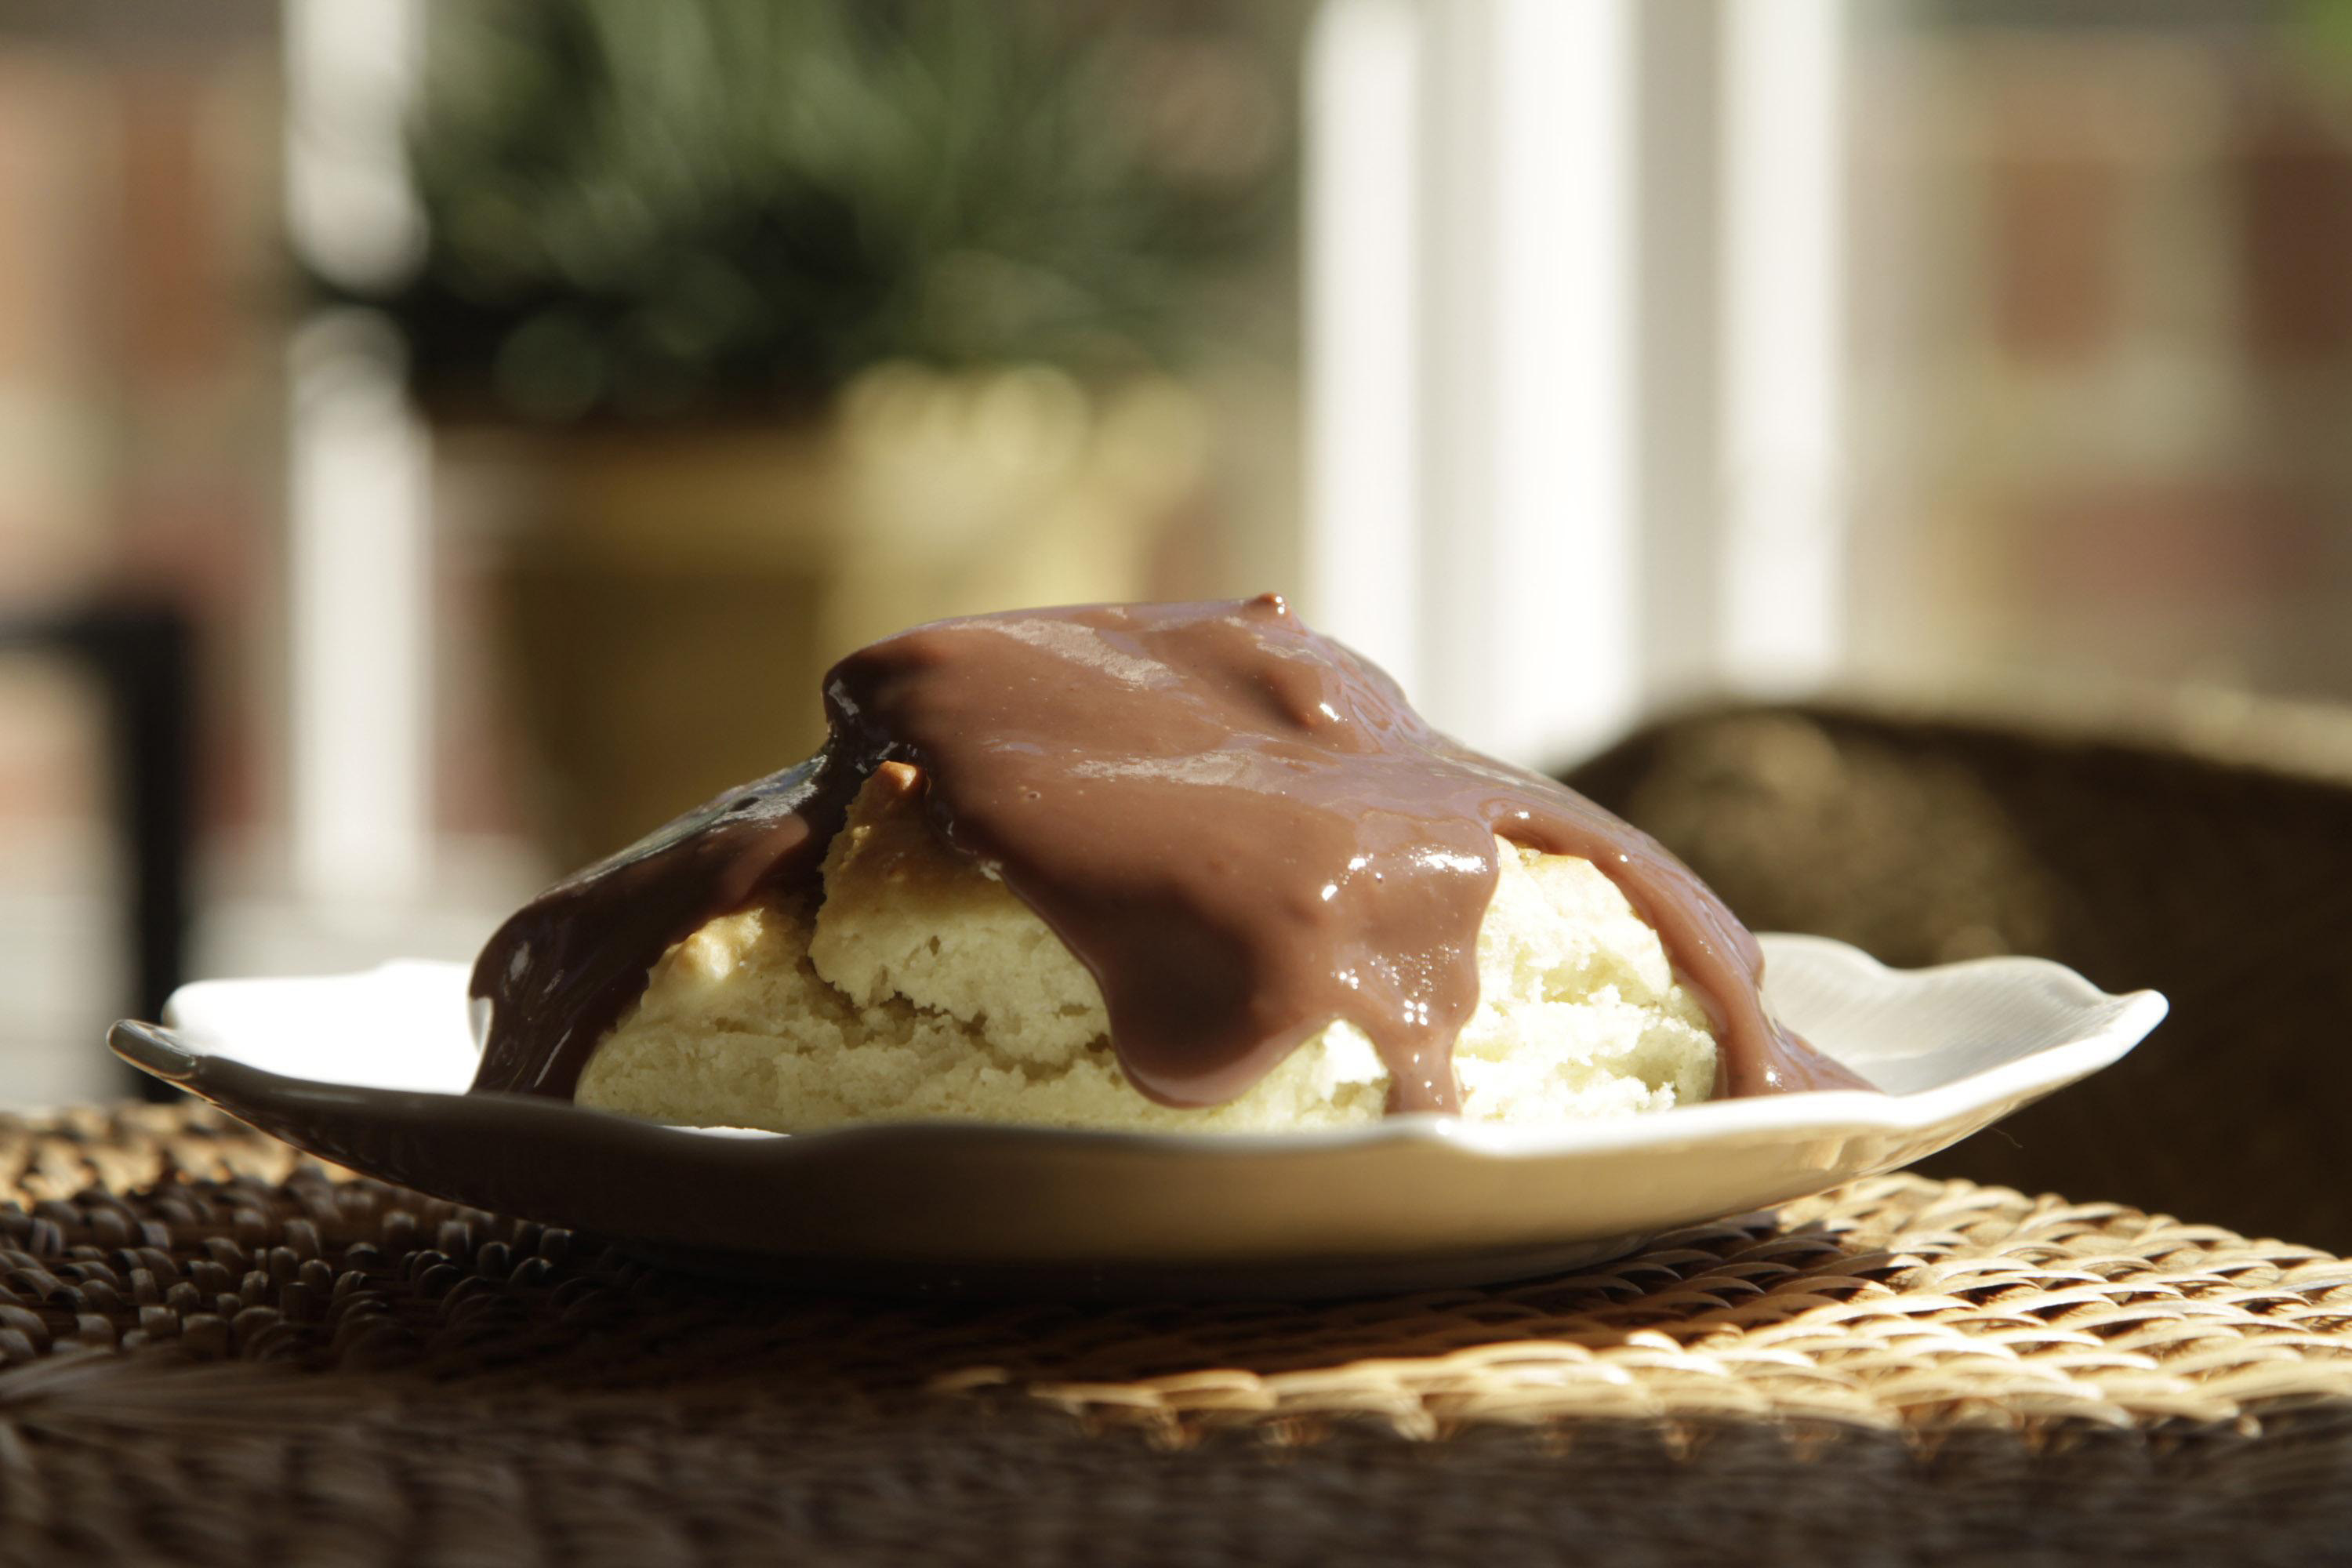 Soft-lit ceramic plate containing warm biscuits and gooey chocolate gravy on top